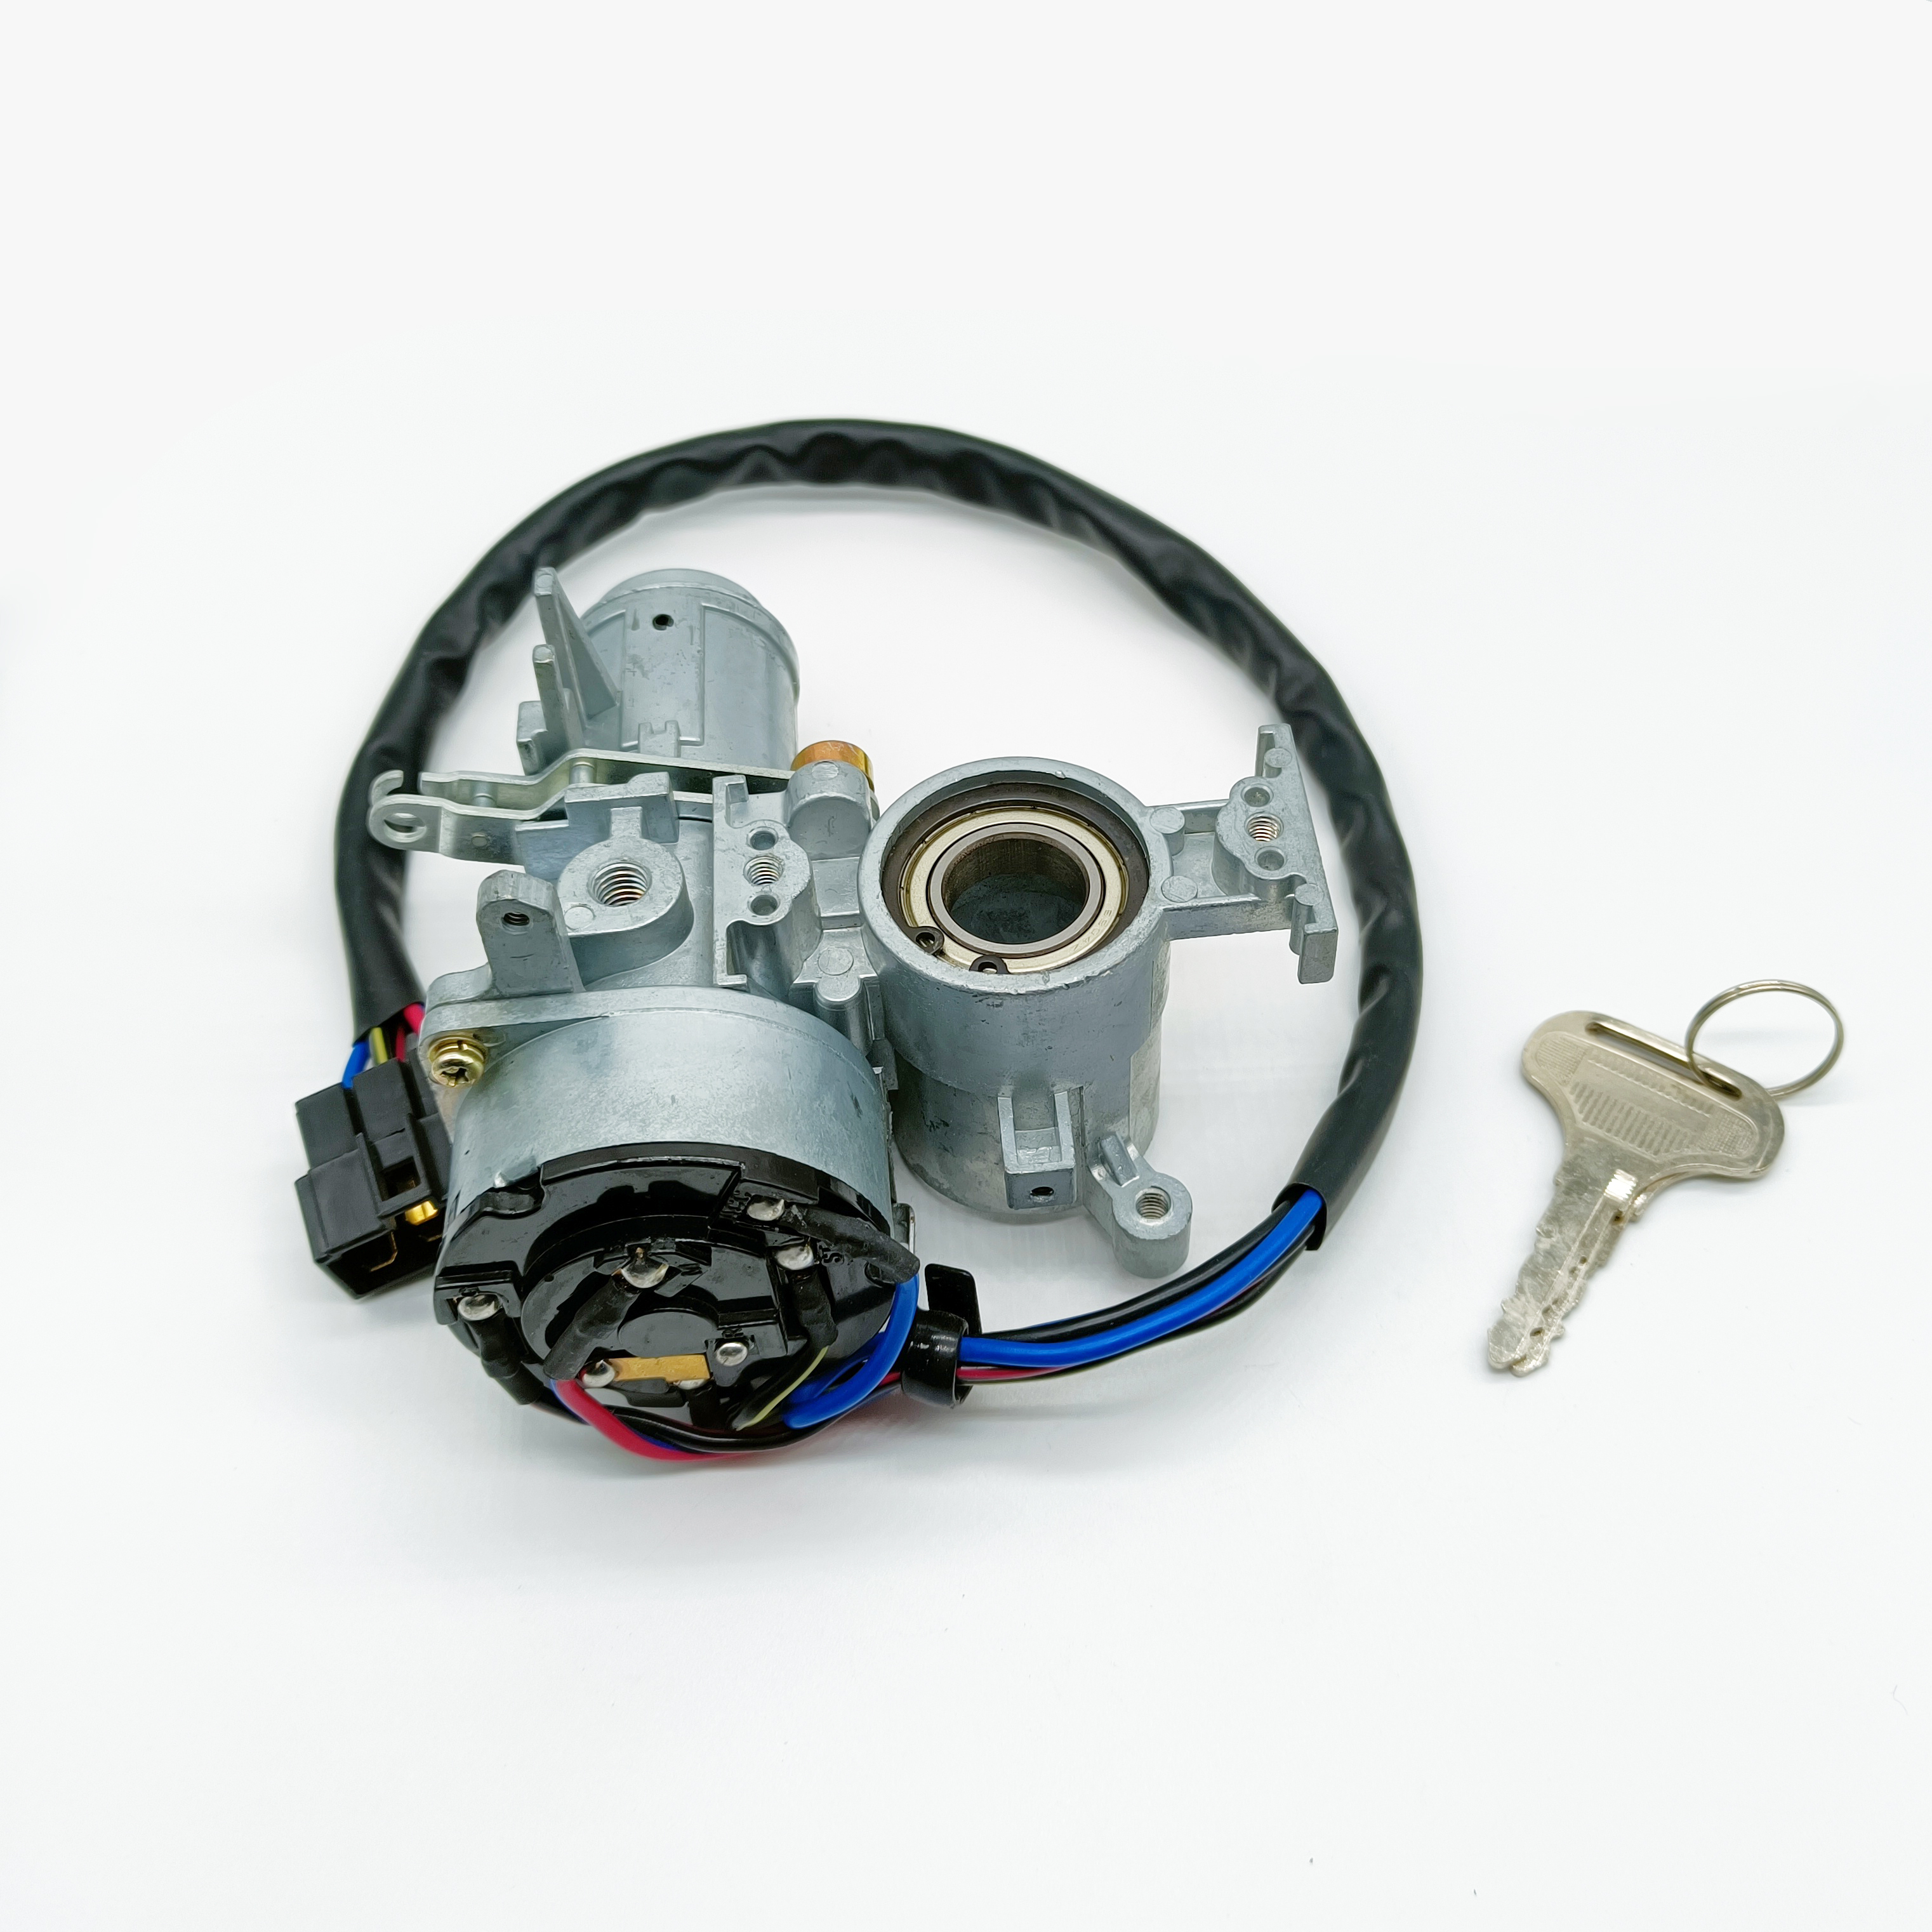 Ignition switch for Mitsubishi CANTER PS100 OEM MB482805 MB0987335